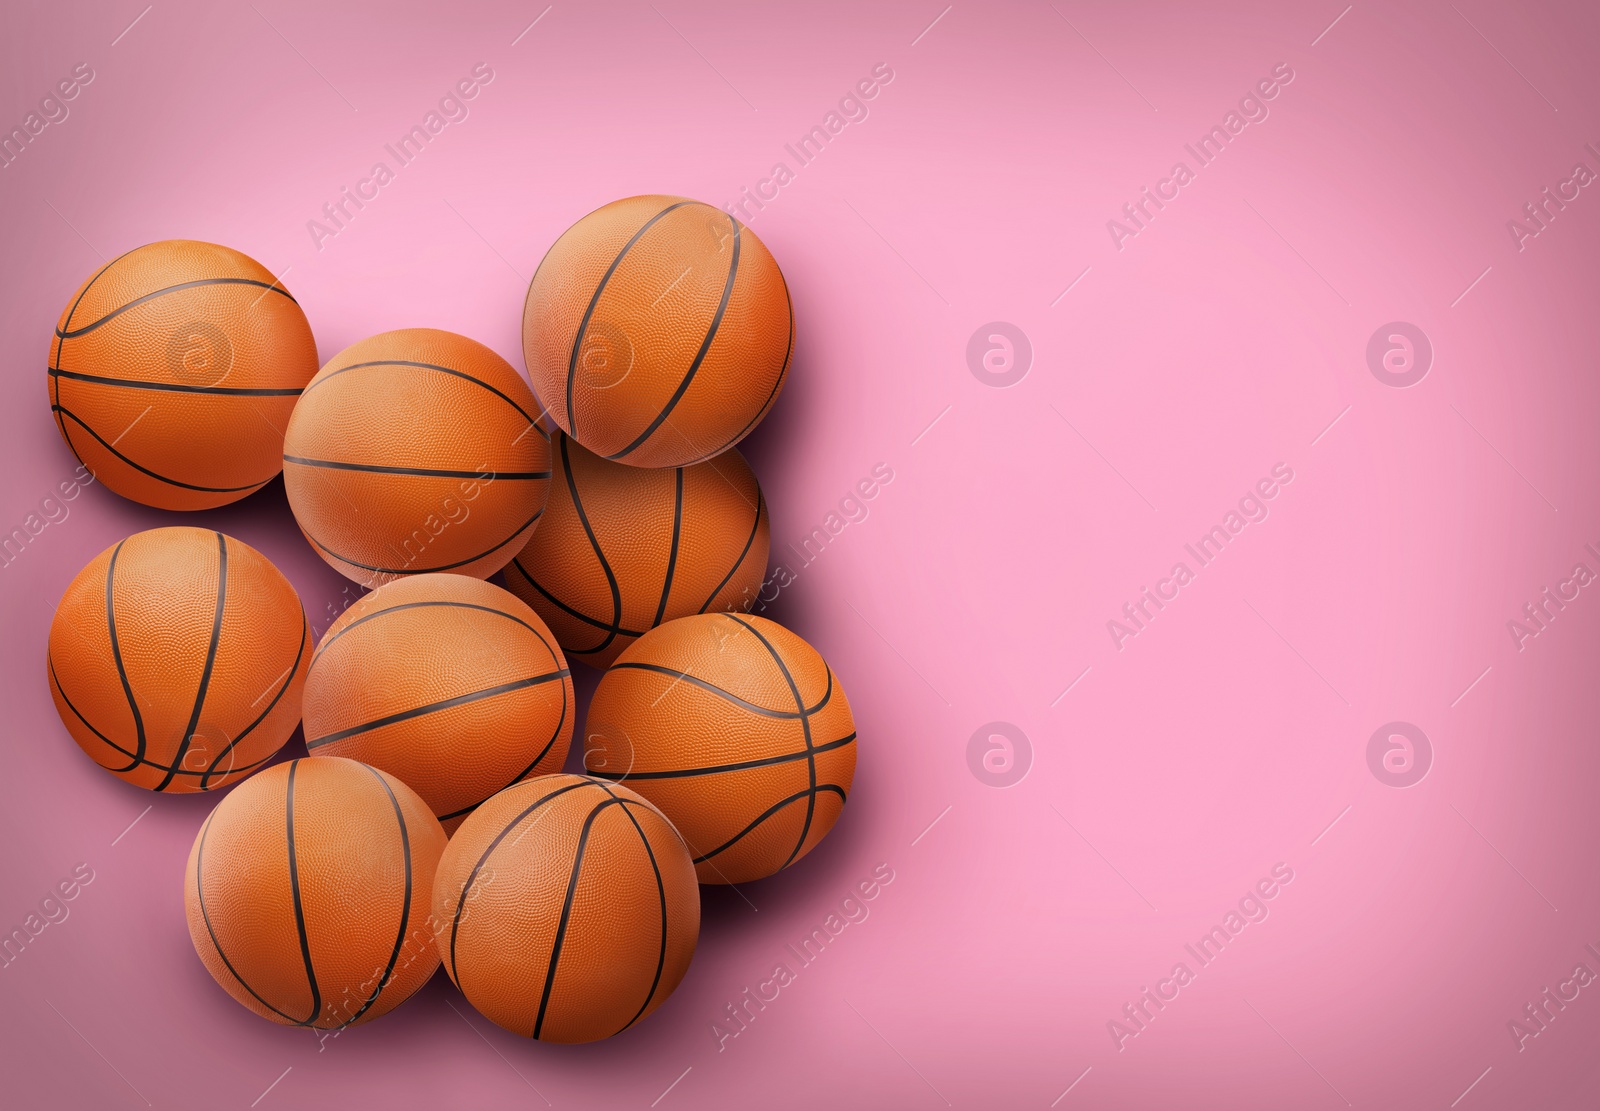 Image of Many orange basketball balls on pink background. Space for text